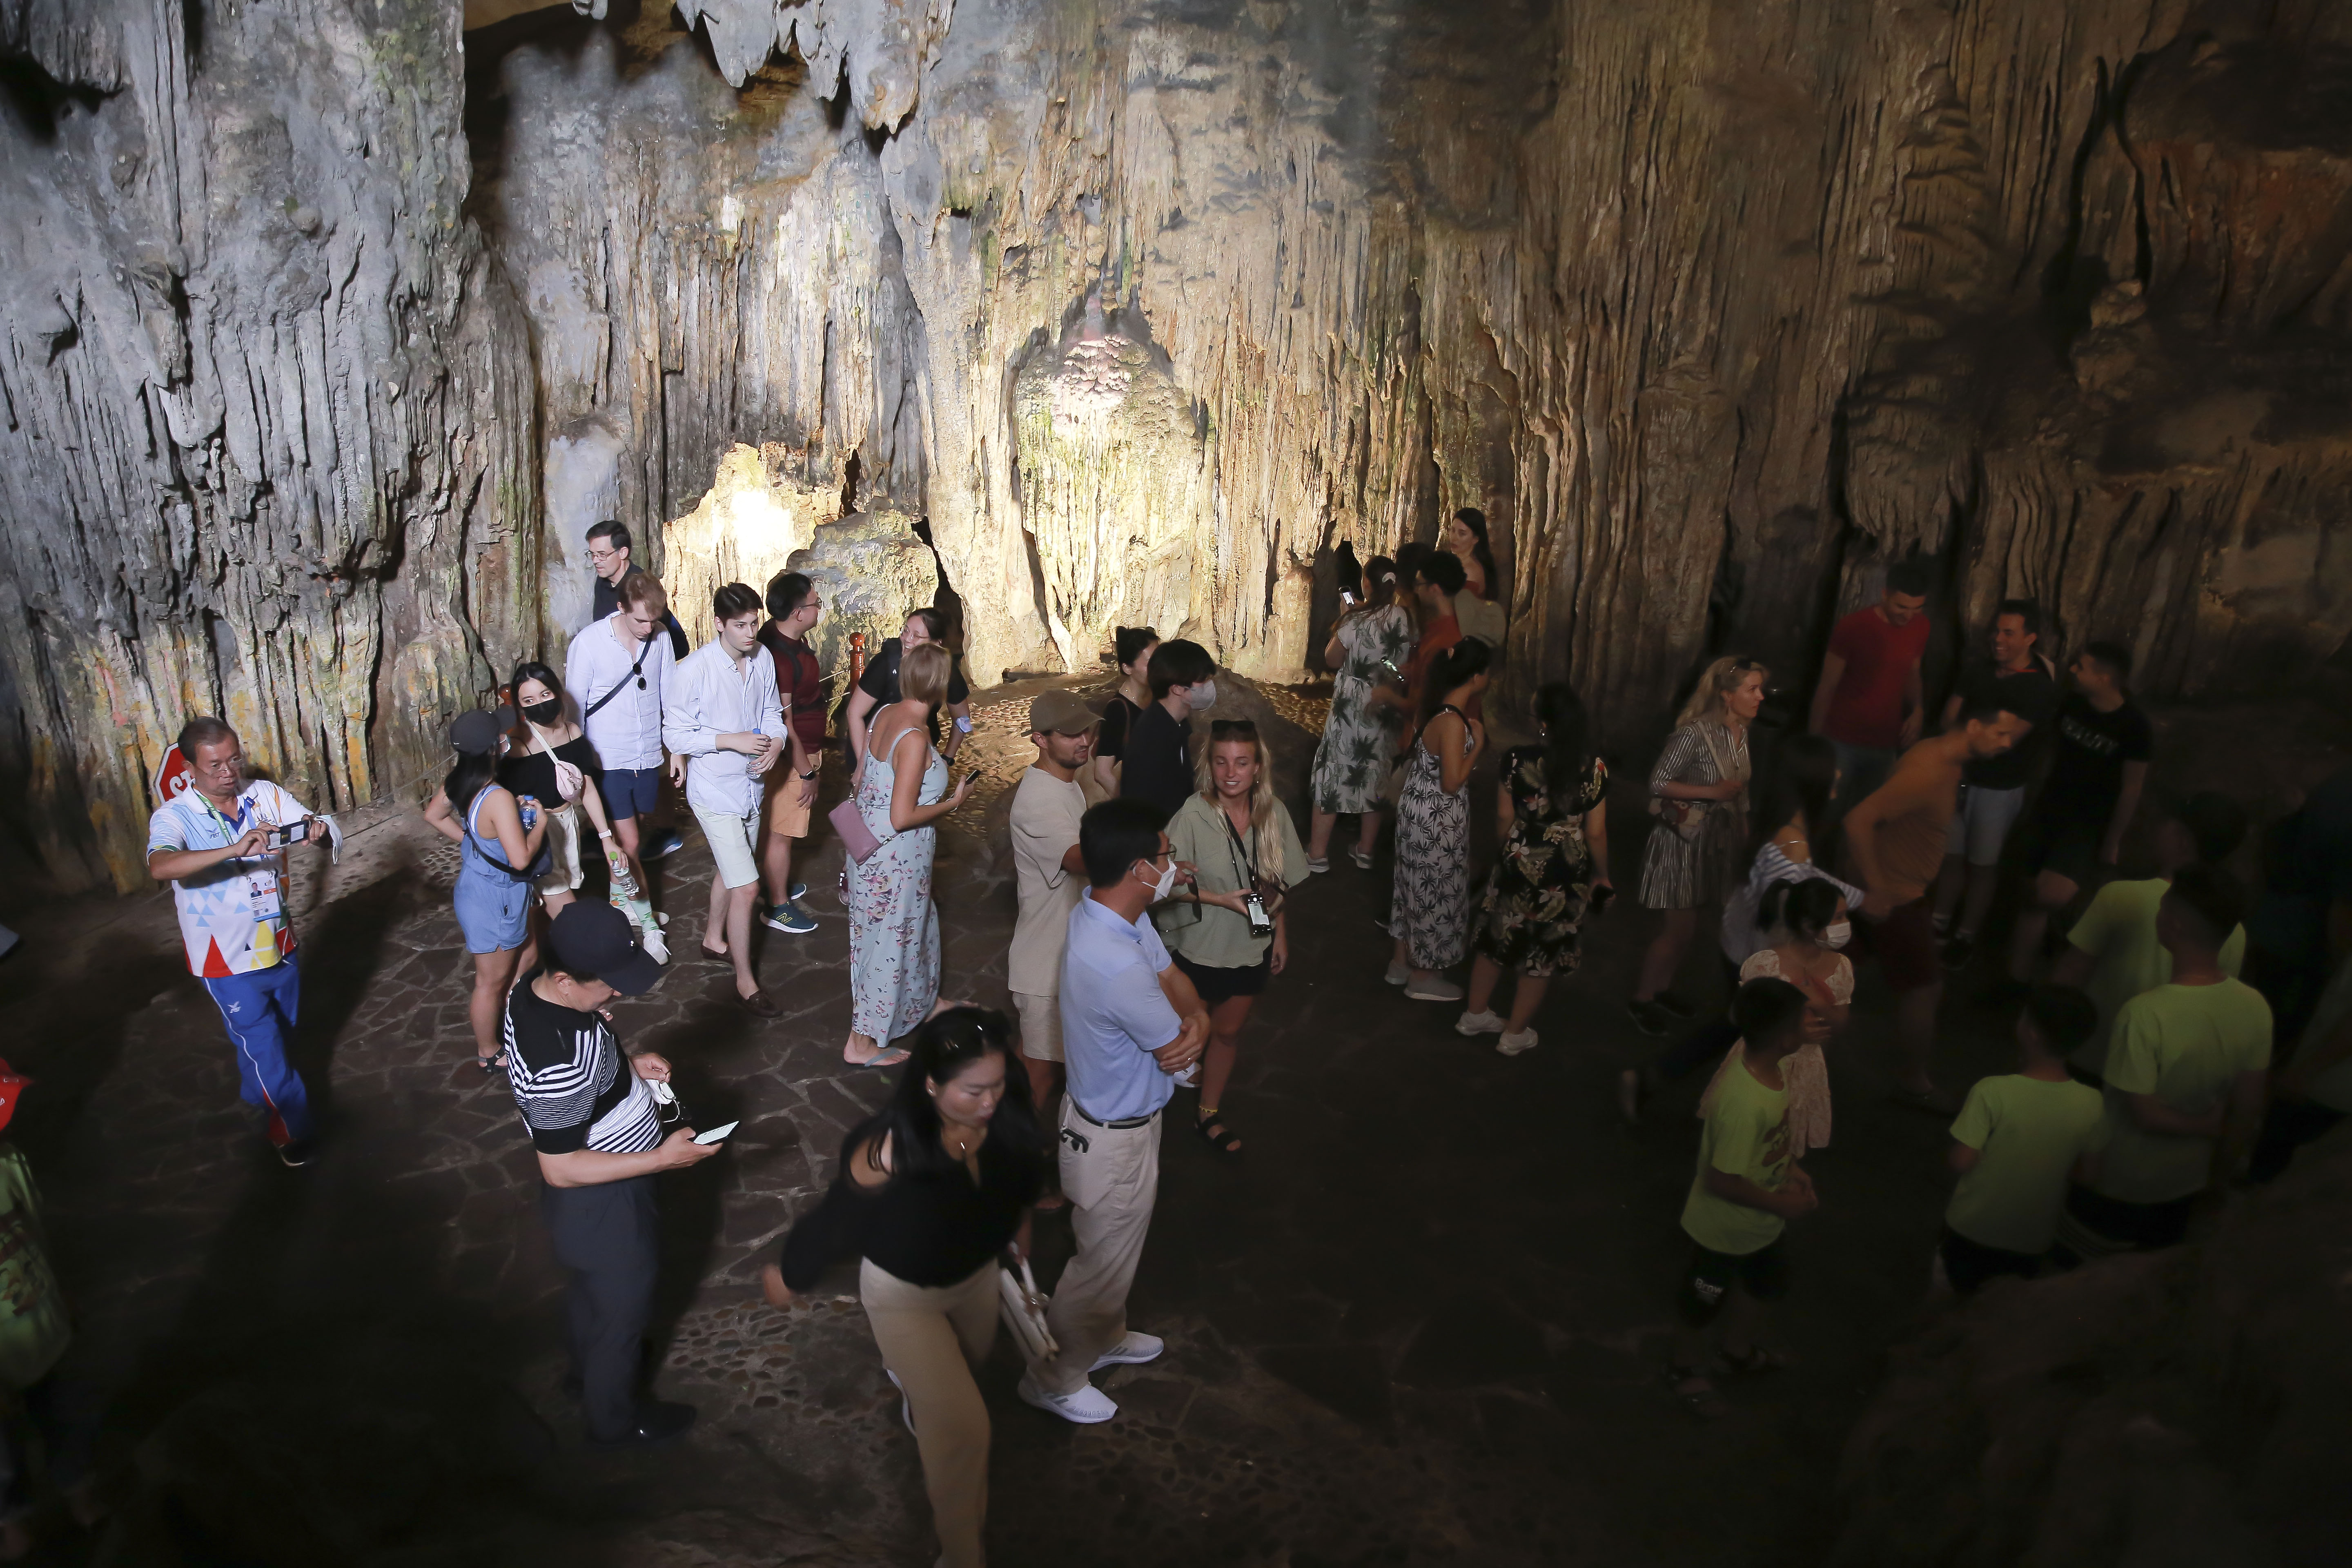 Visitors at the Sung Sot Cave located on Bo Hon Island. This is one of the most beautiful caves in Ha Long Bay.